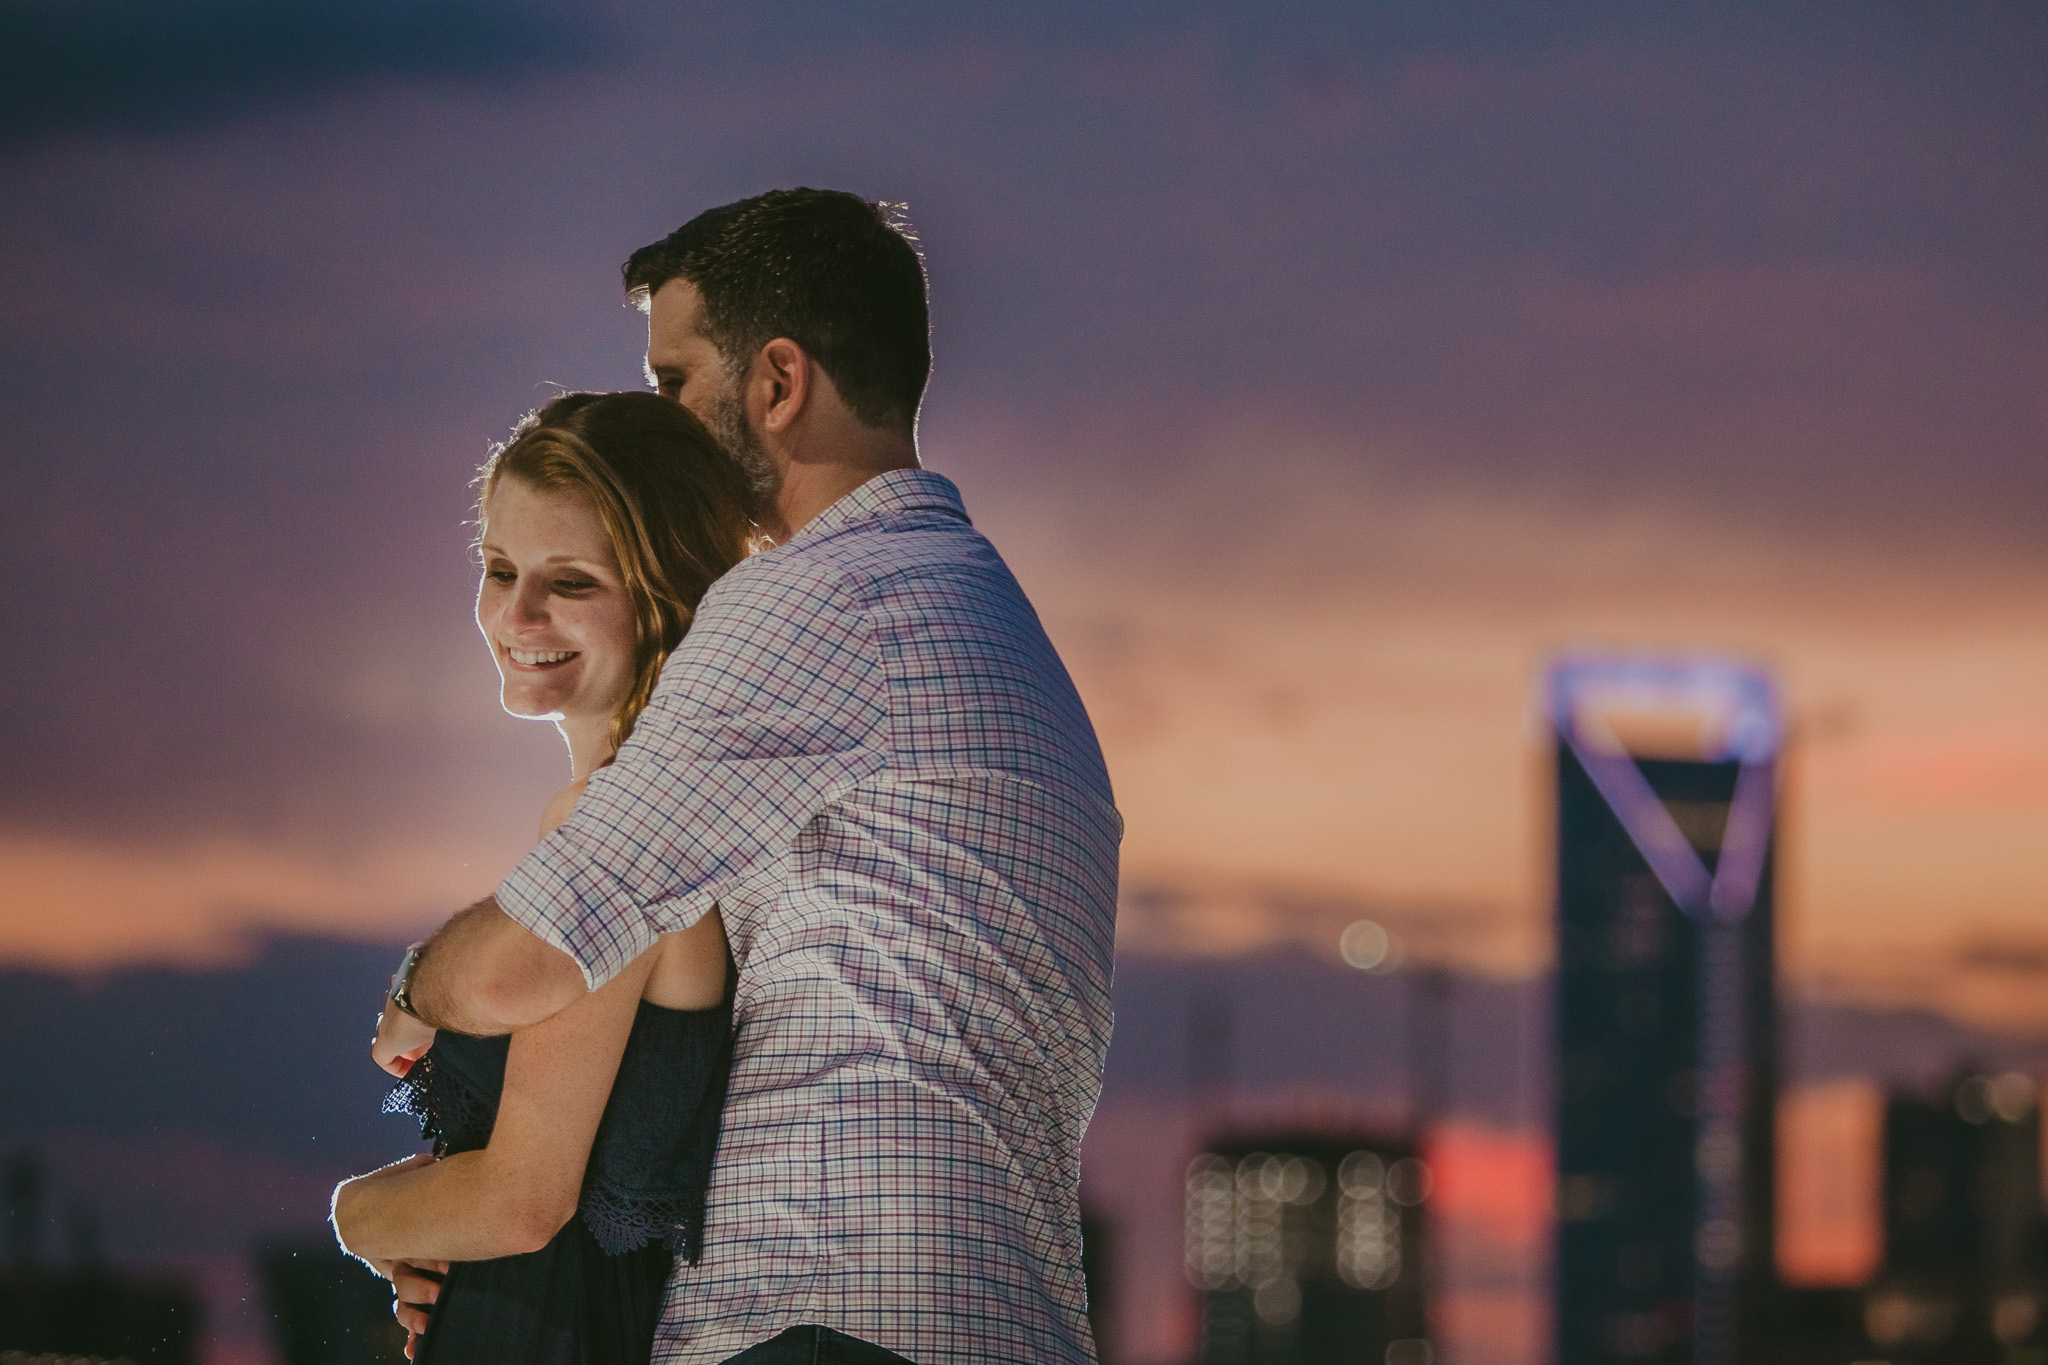 A sweet hug with the duke energy building in the background at this Charlotte, NC engagement session